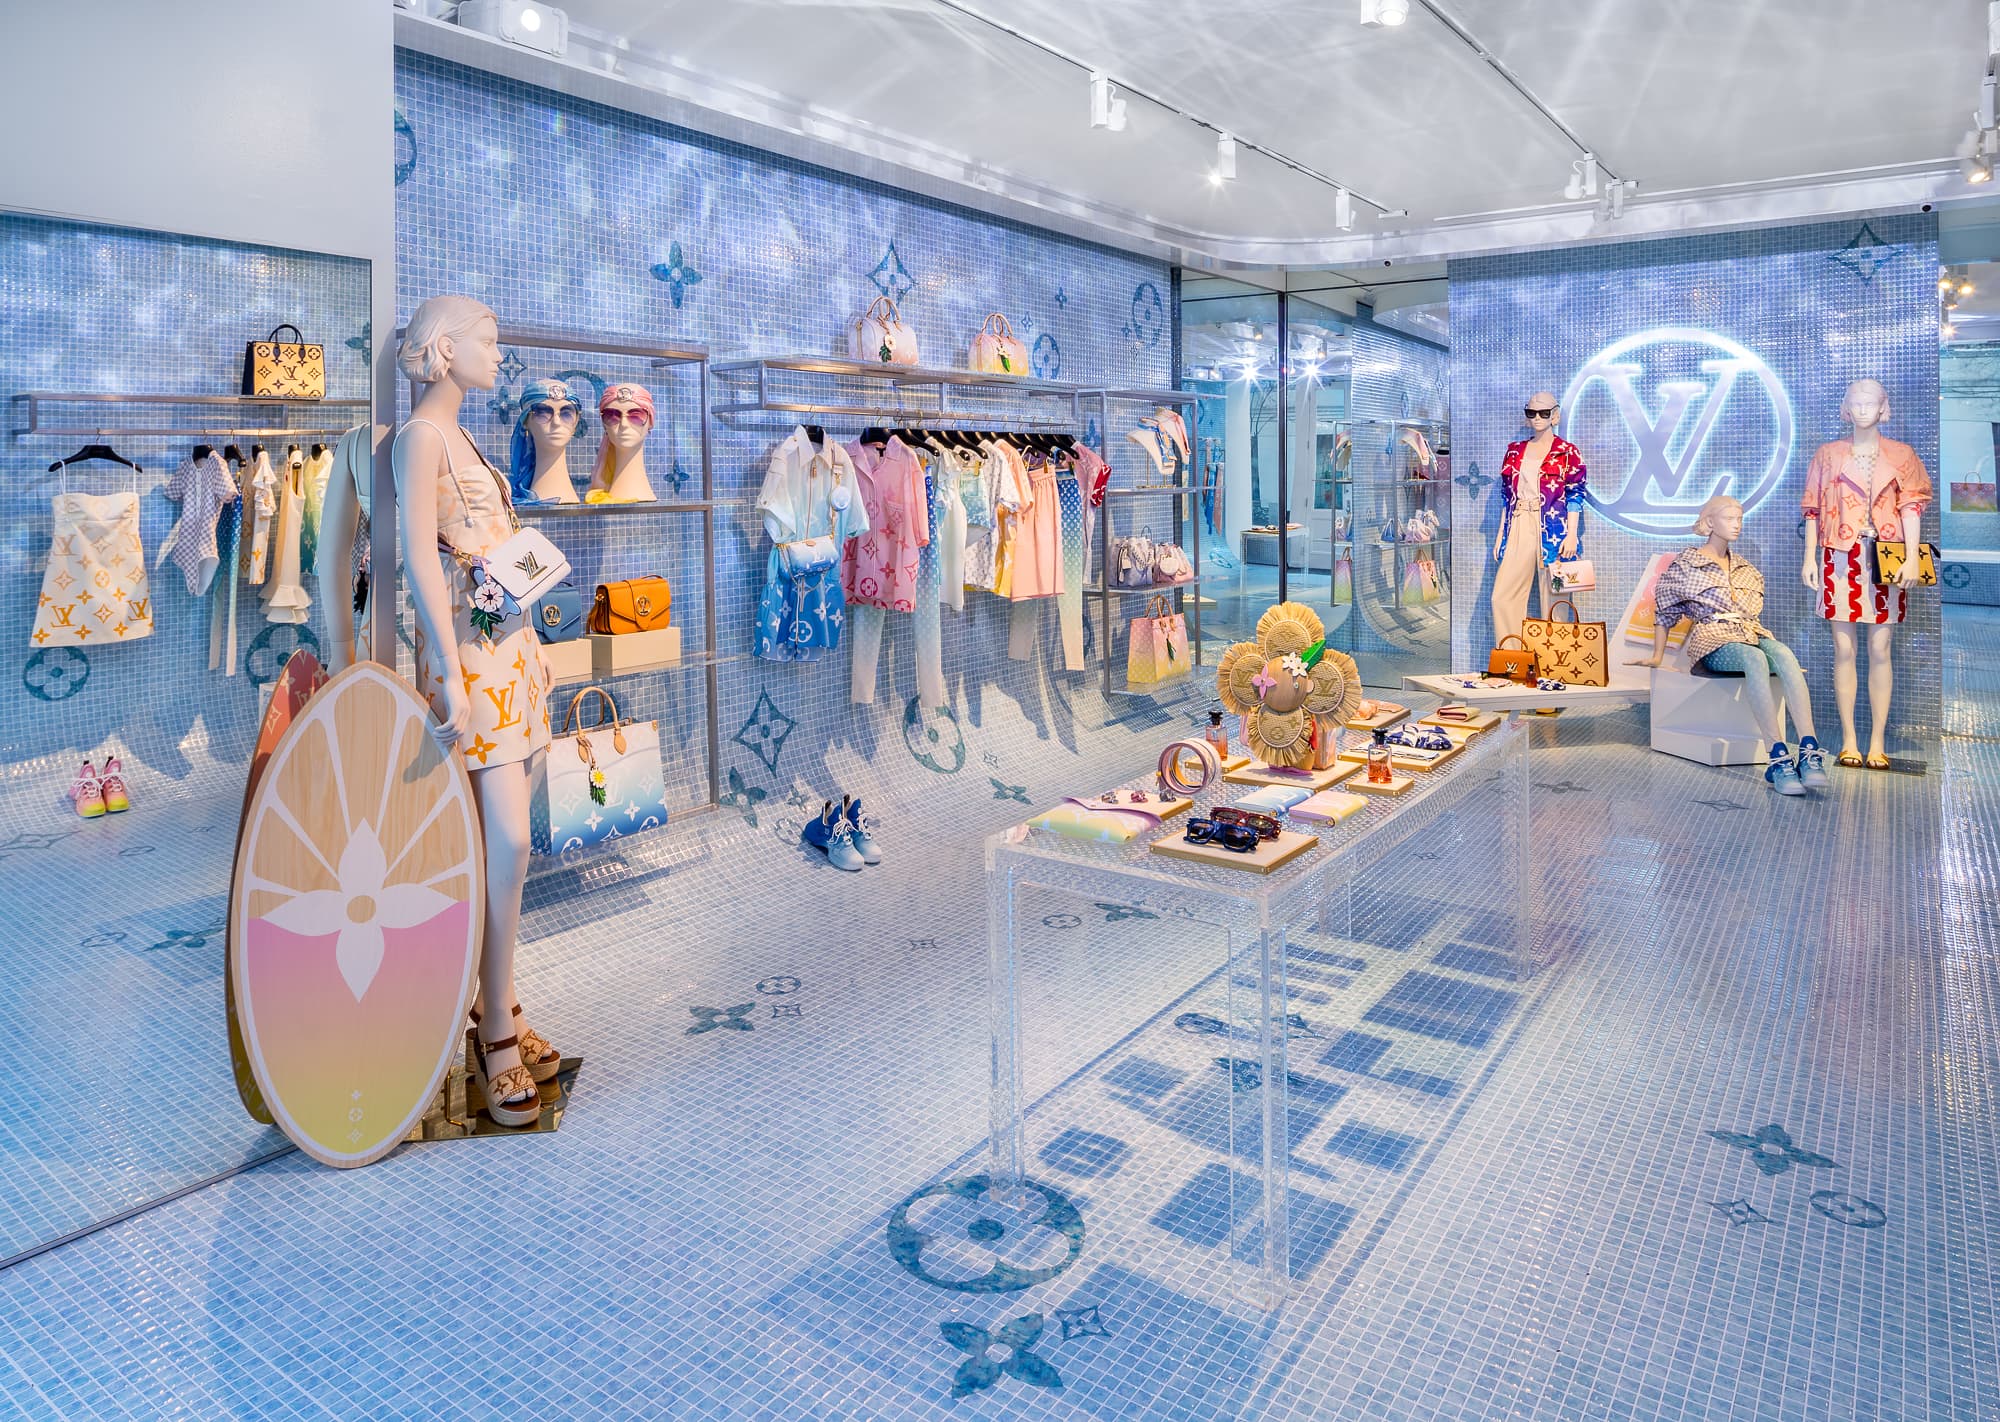 Last project pop-up summer LOUIS VUITTON for the reopening of